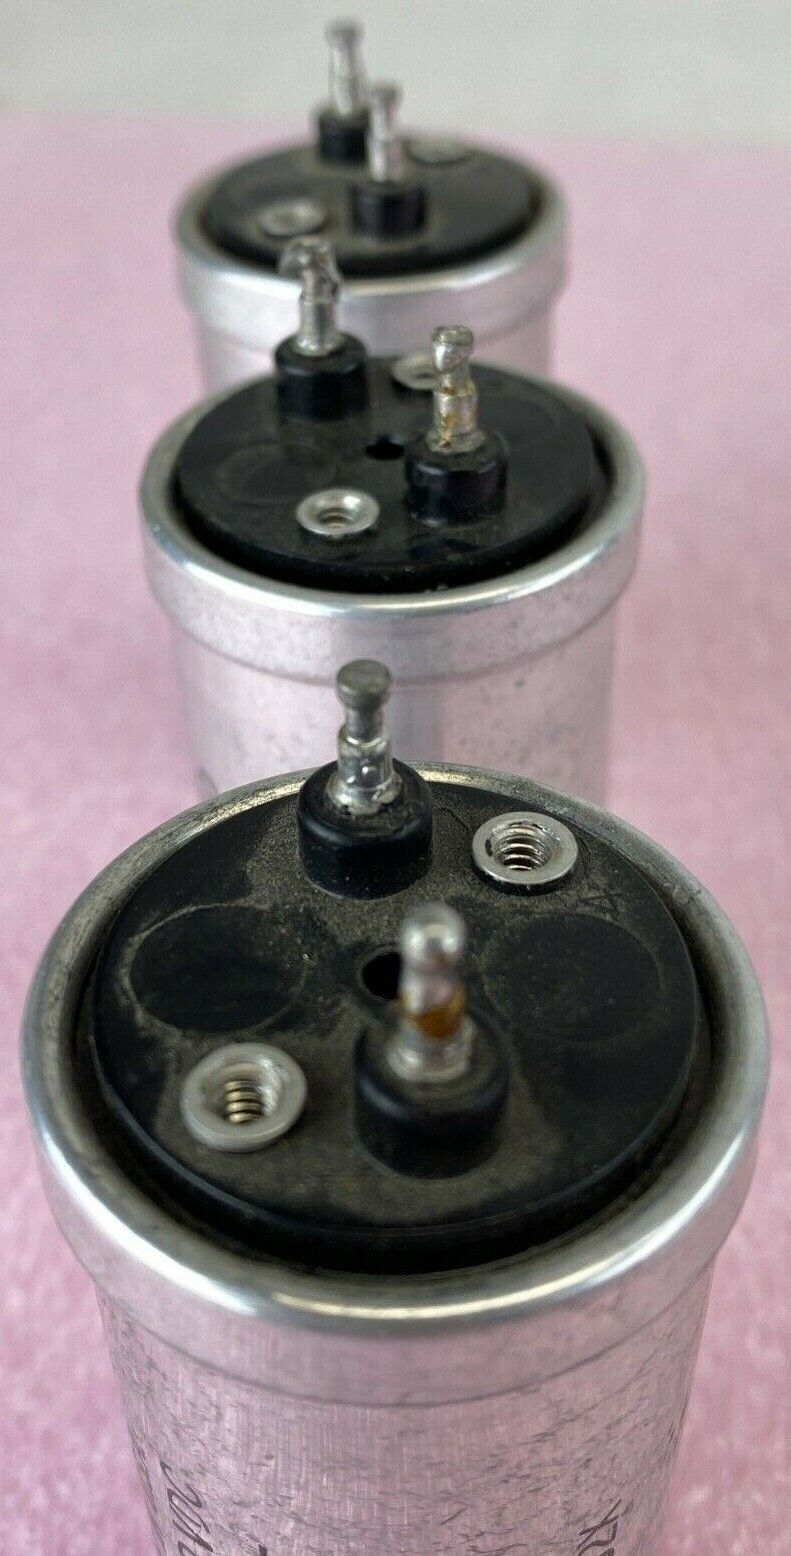 Lot of 3 Mallory TS-18532 800MFD 50VDC electrolytic capacitor 2356302X